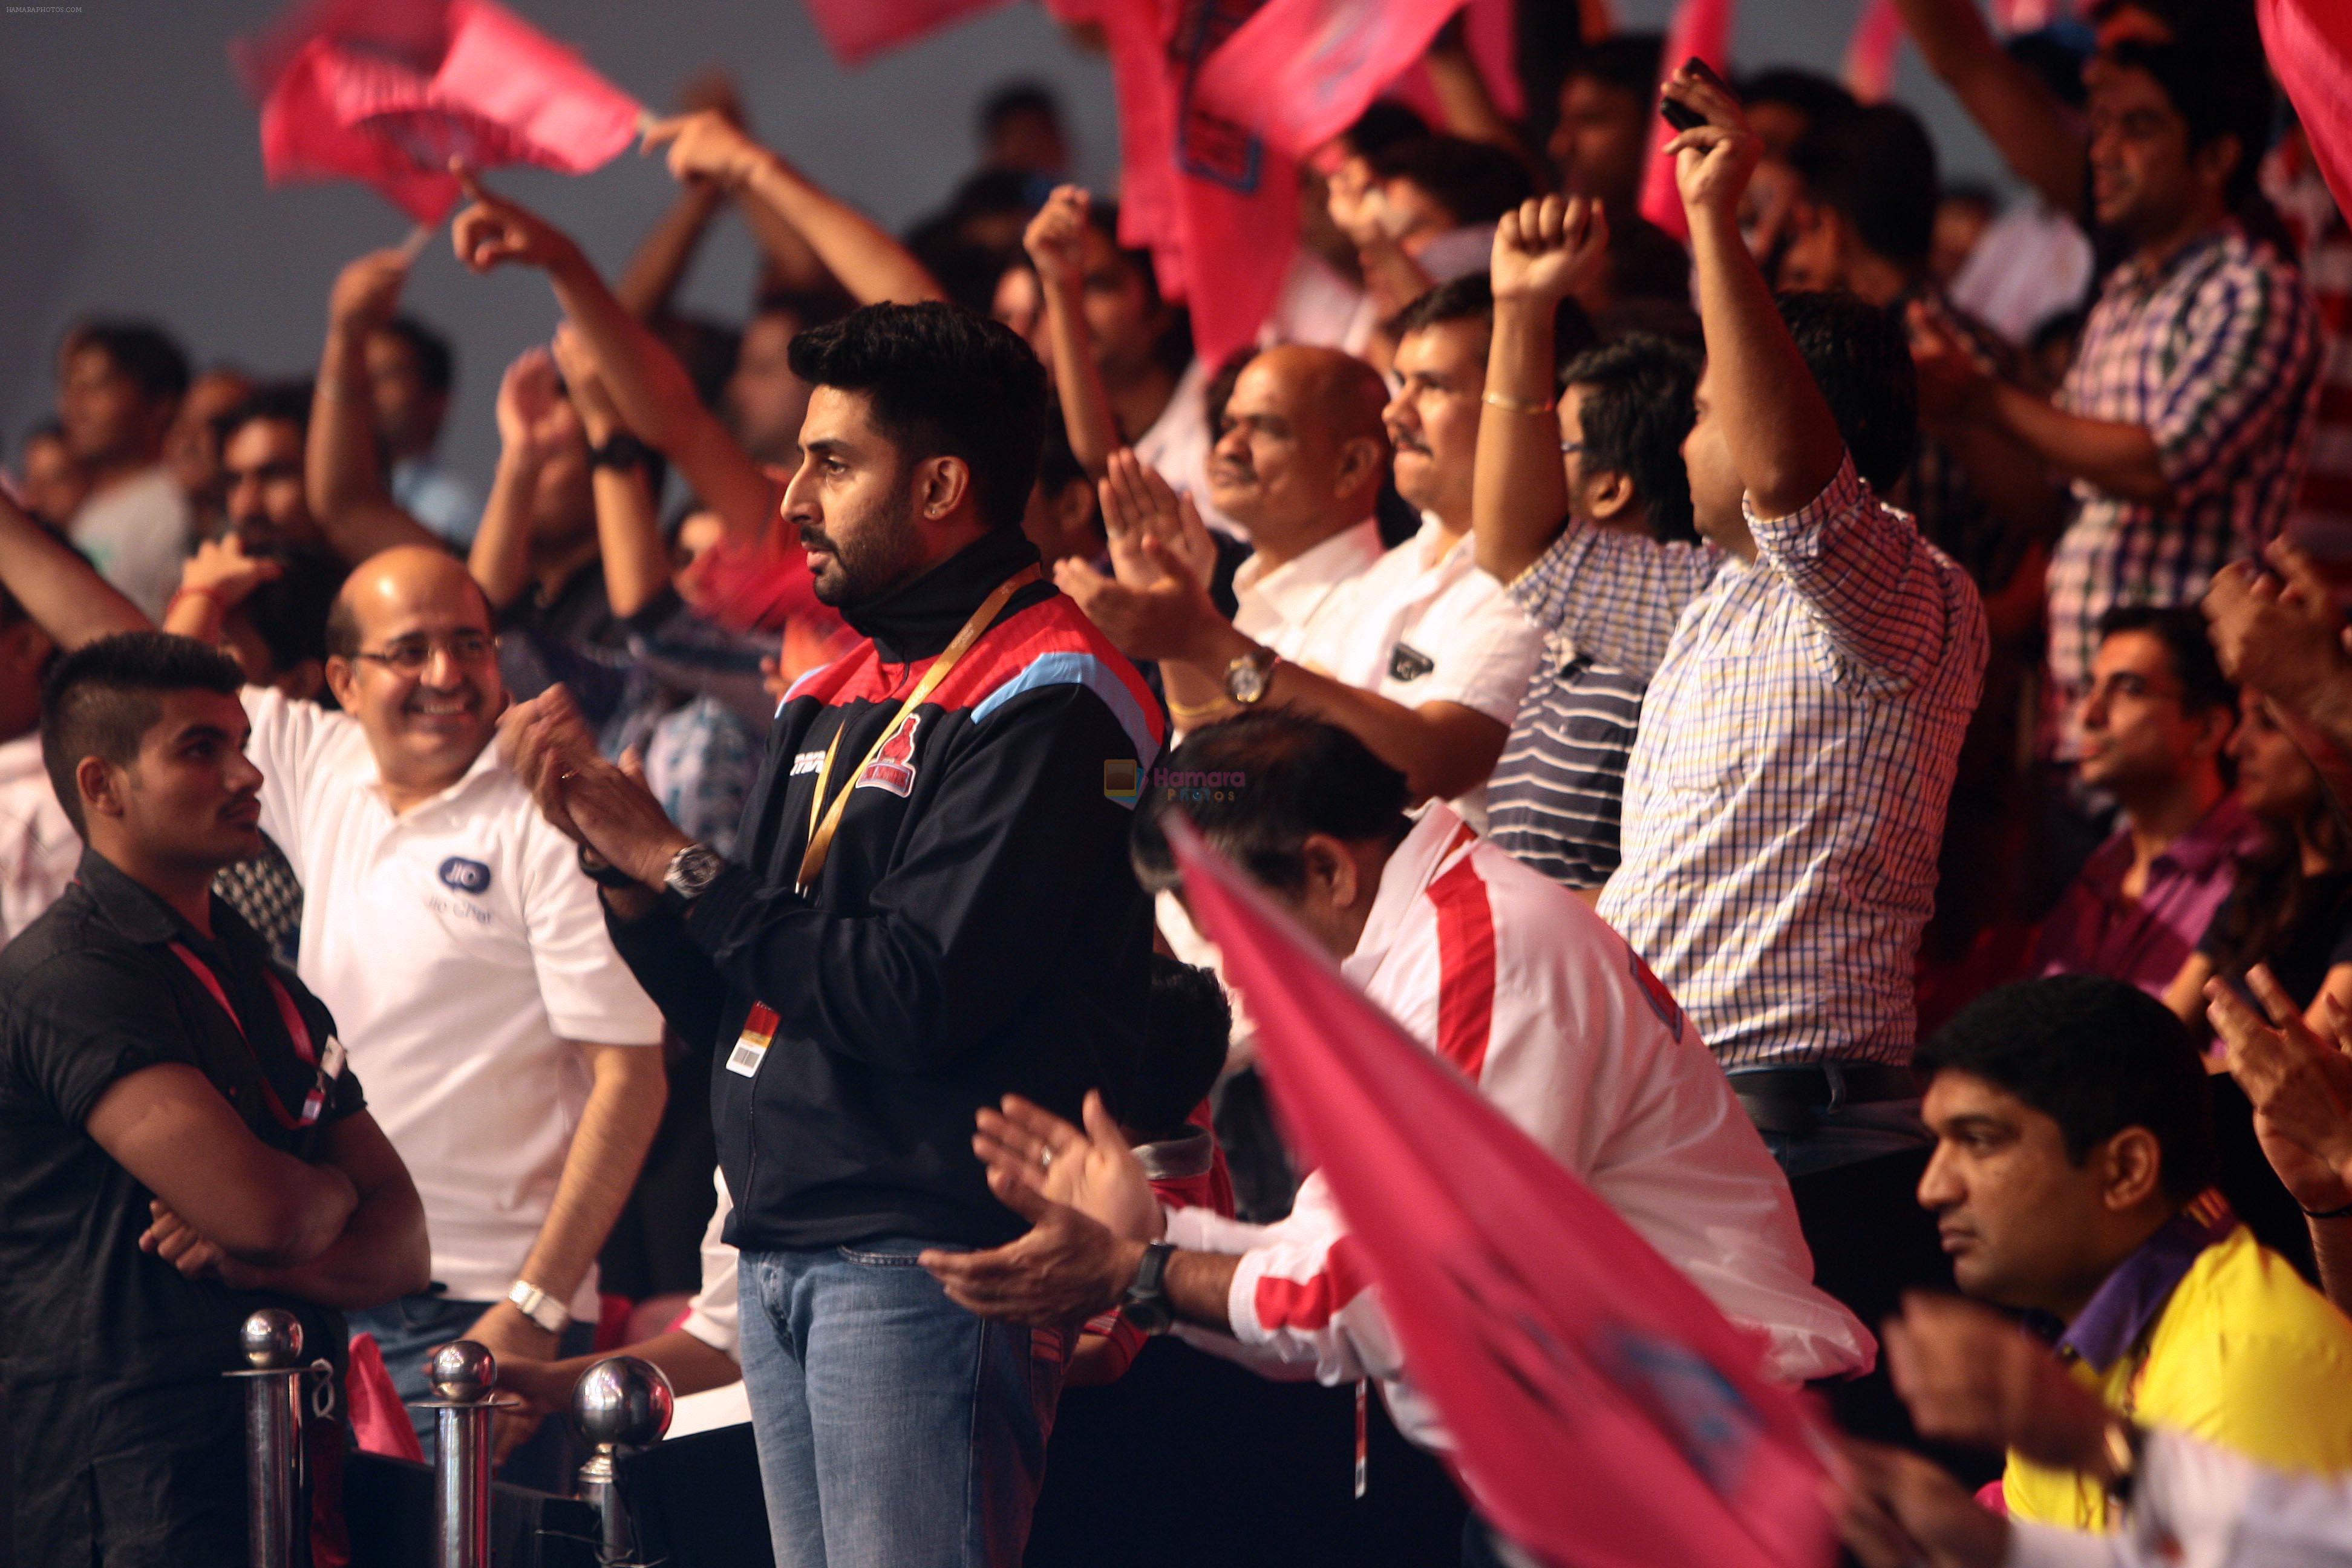 Jaipur Pink Panthers owner Abhishek Bachchan looks on during his team's match